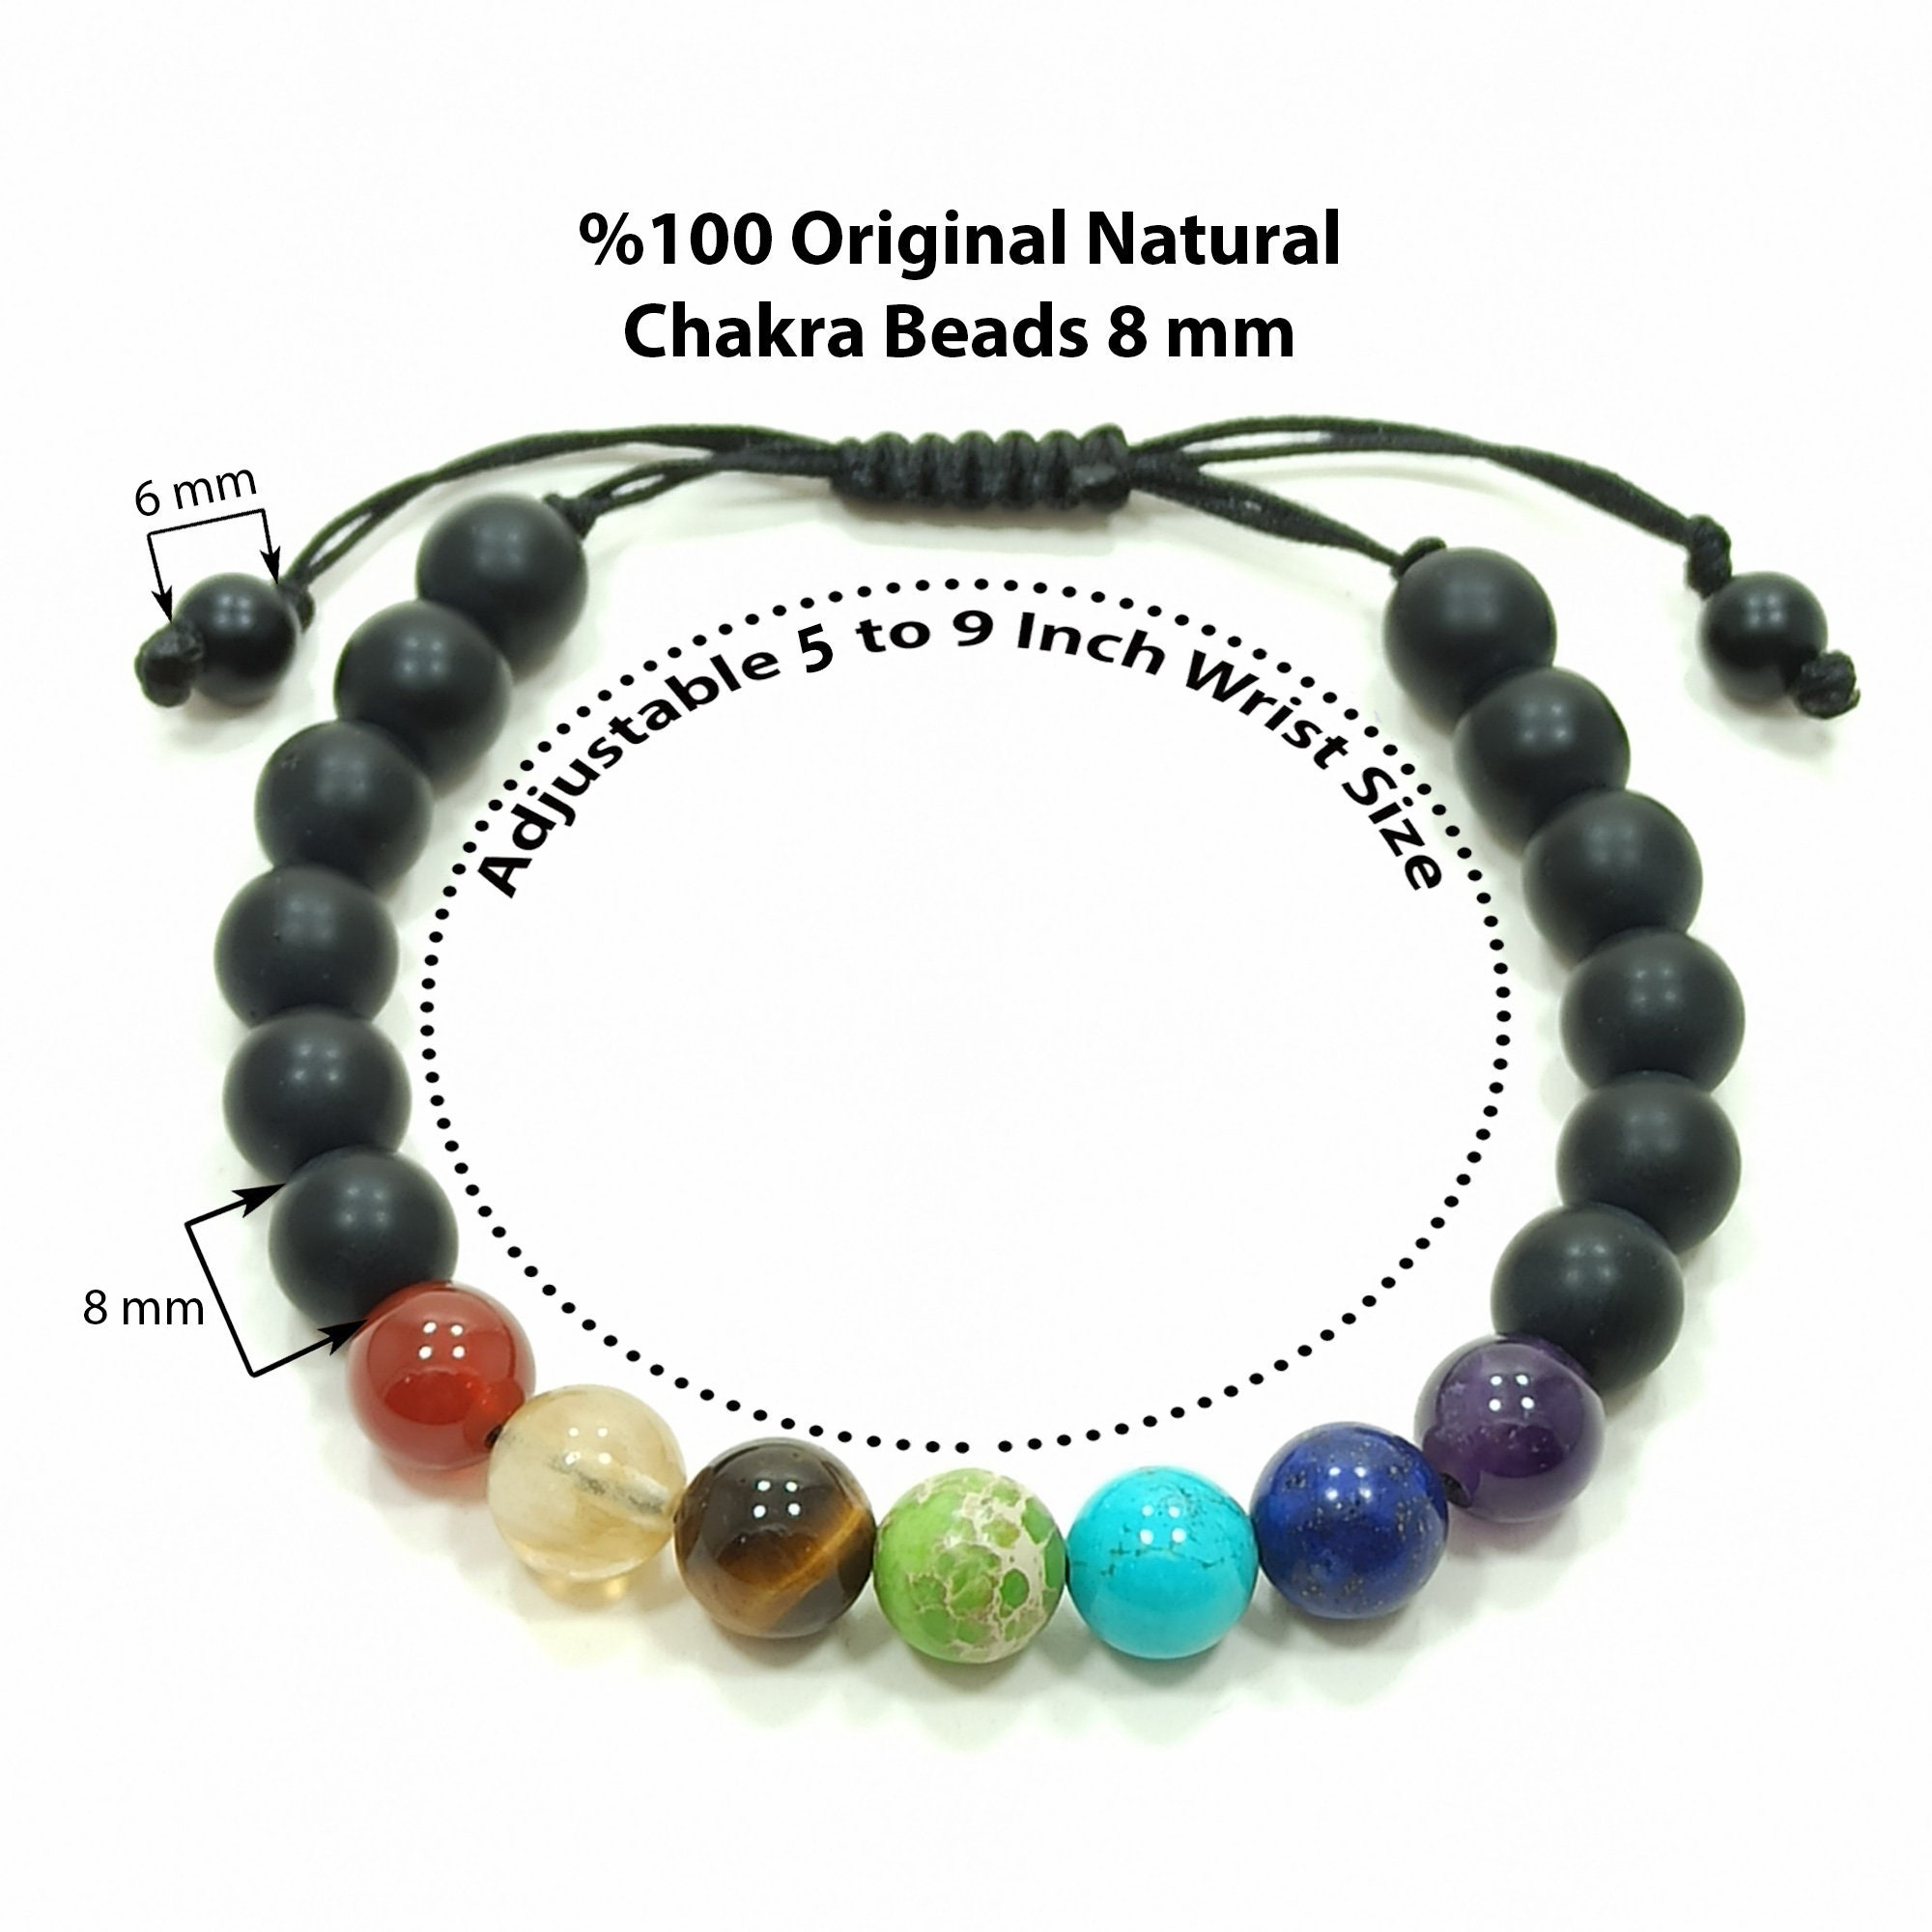 Juccini Chakra Beads Bracelets - 7 Chakra Lava Stone Bracelets for Anxiety  - Lightweight Calming Energy Bracelet Made from Natural Stones - Essential